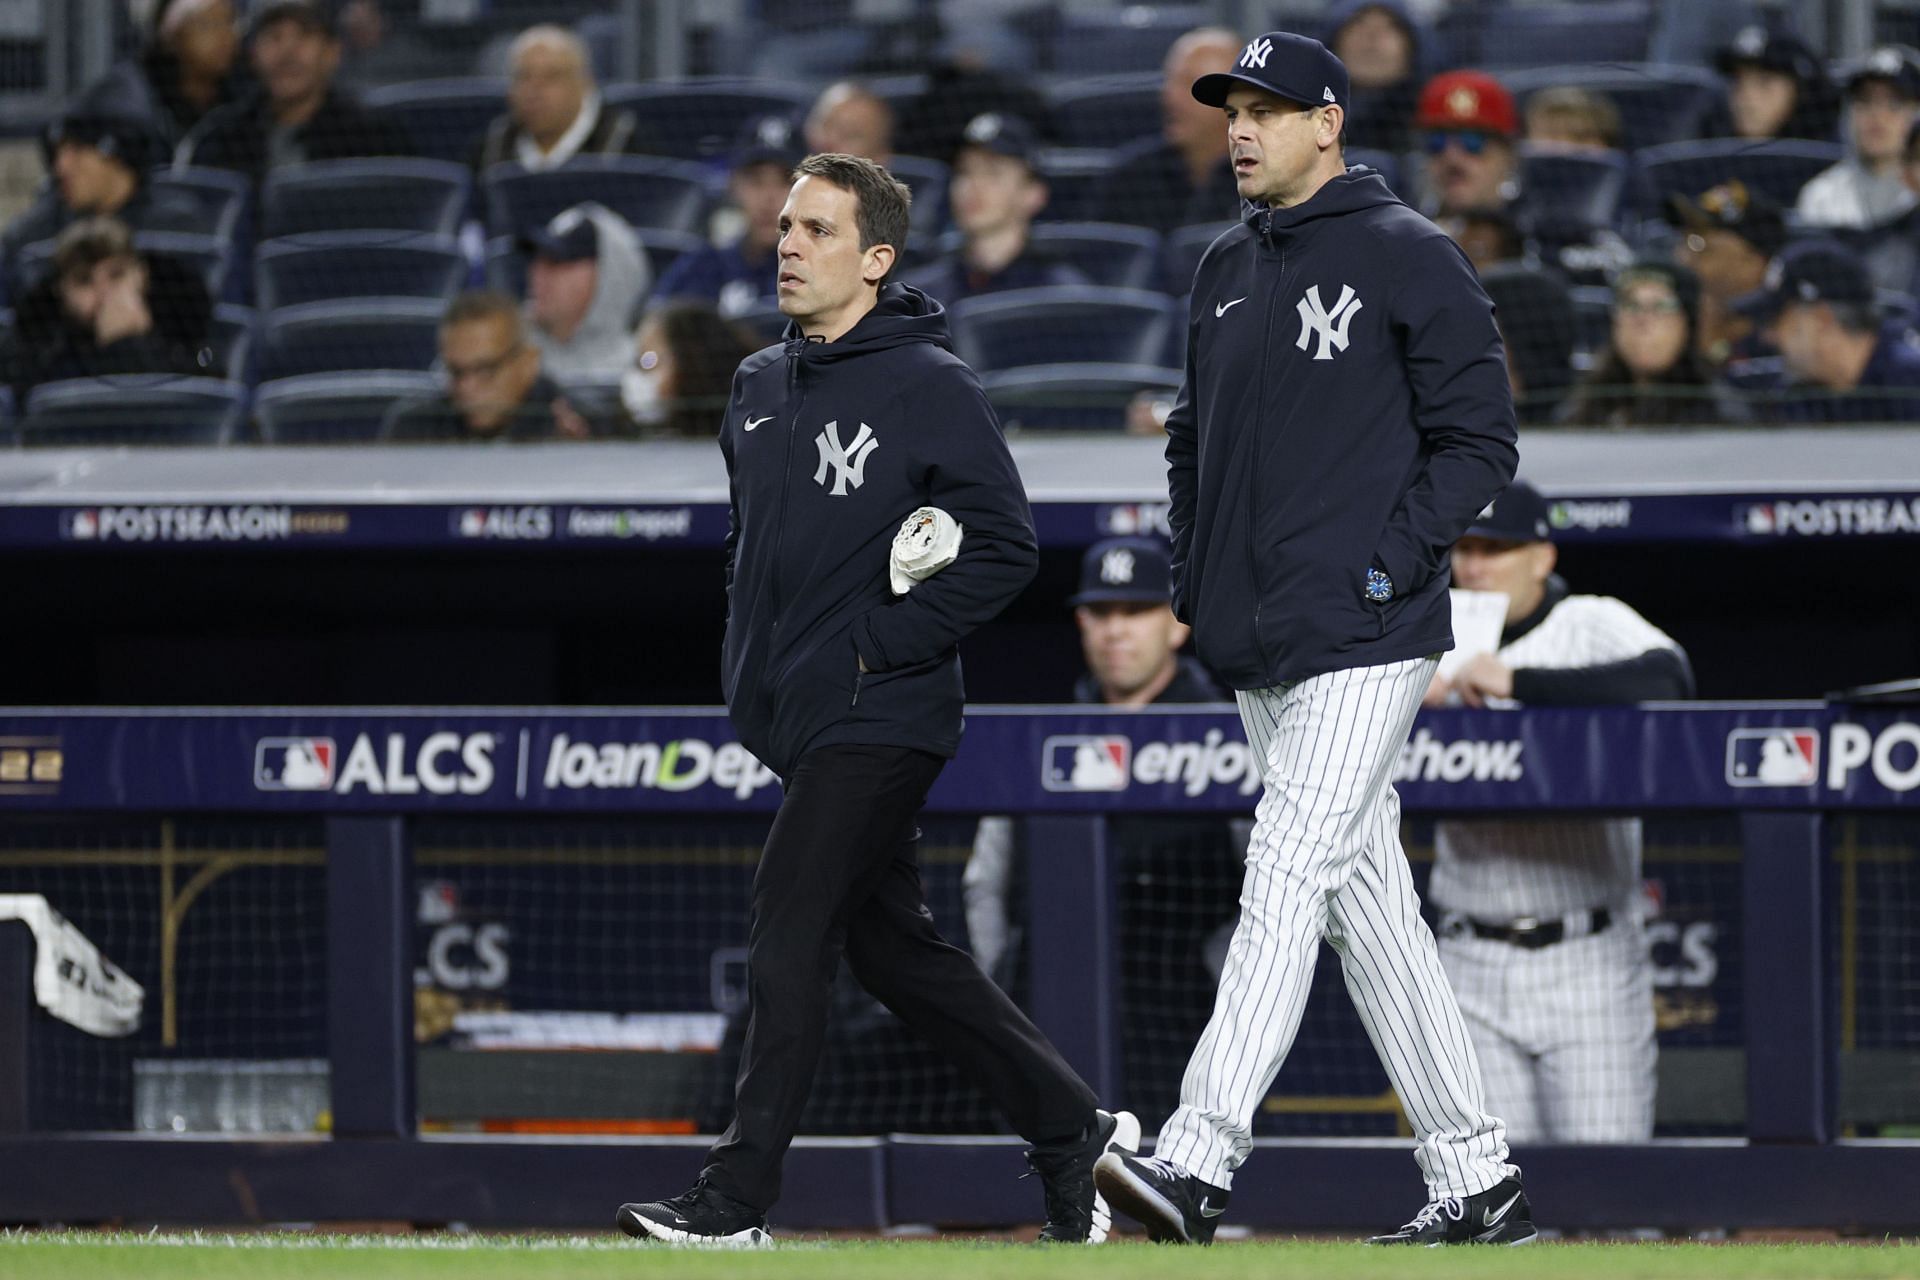 MLB playoffs: Astros open roof not why Yankees losing in ALCS